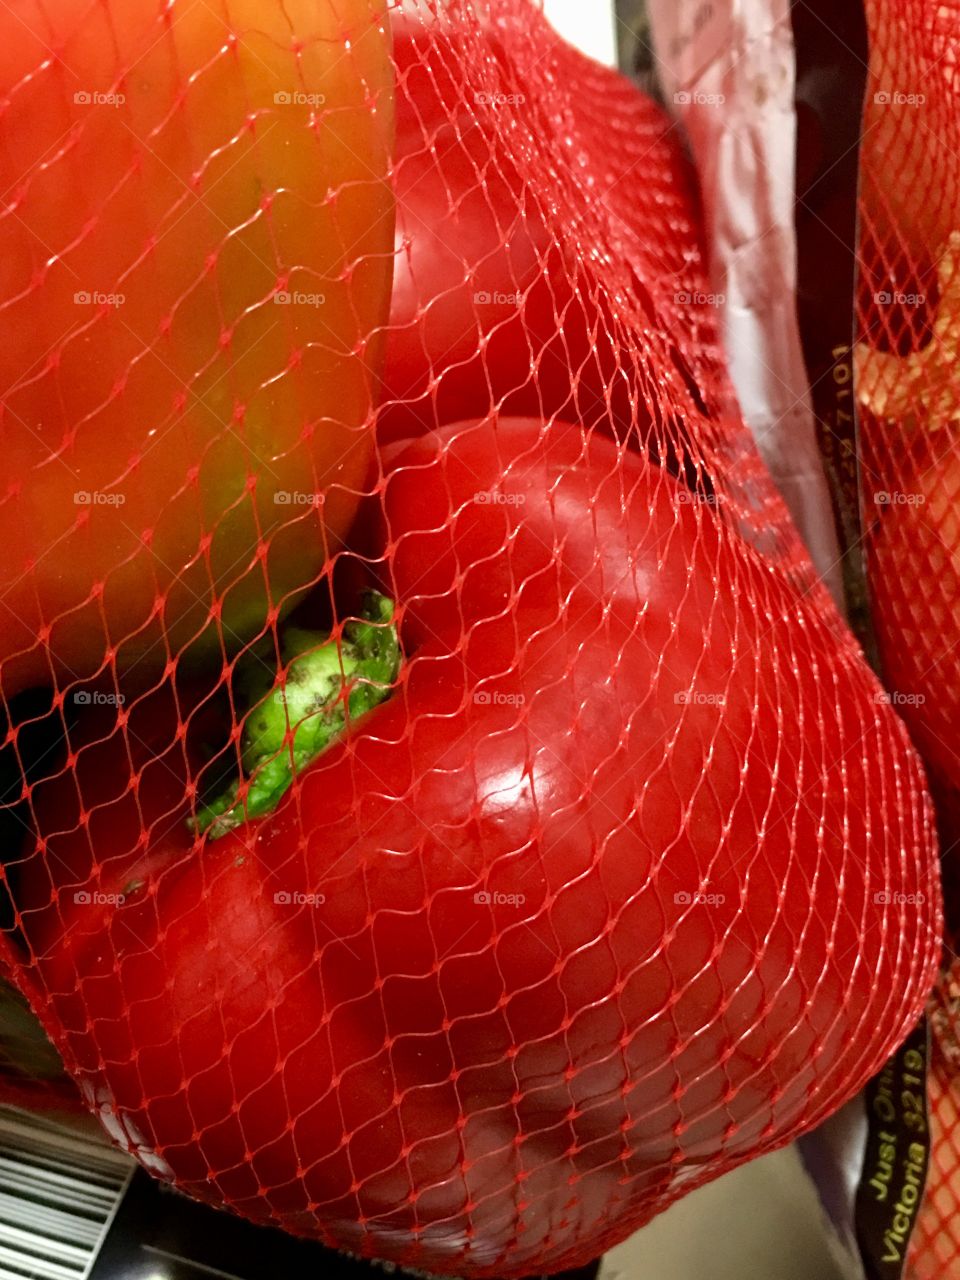 Red sweet bell pepper capsicum in red plastic mesh